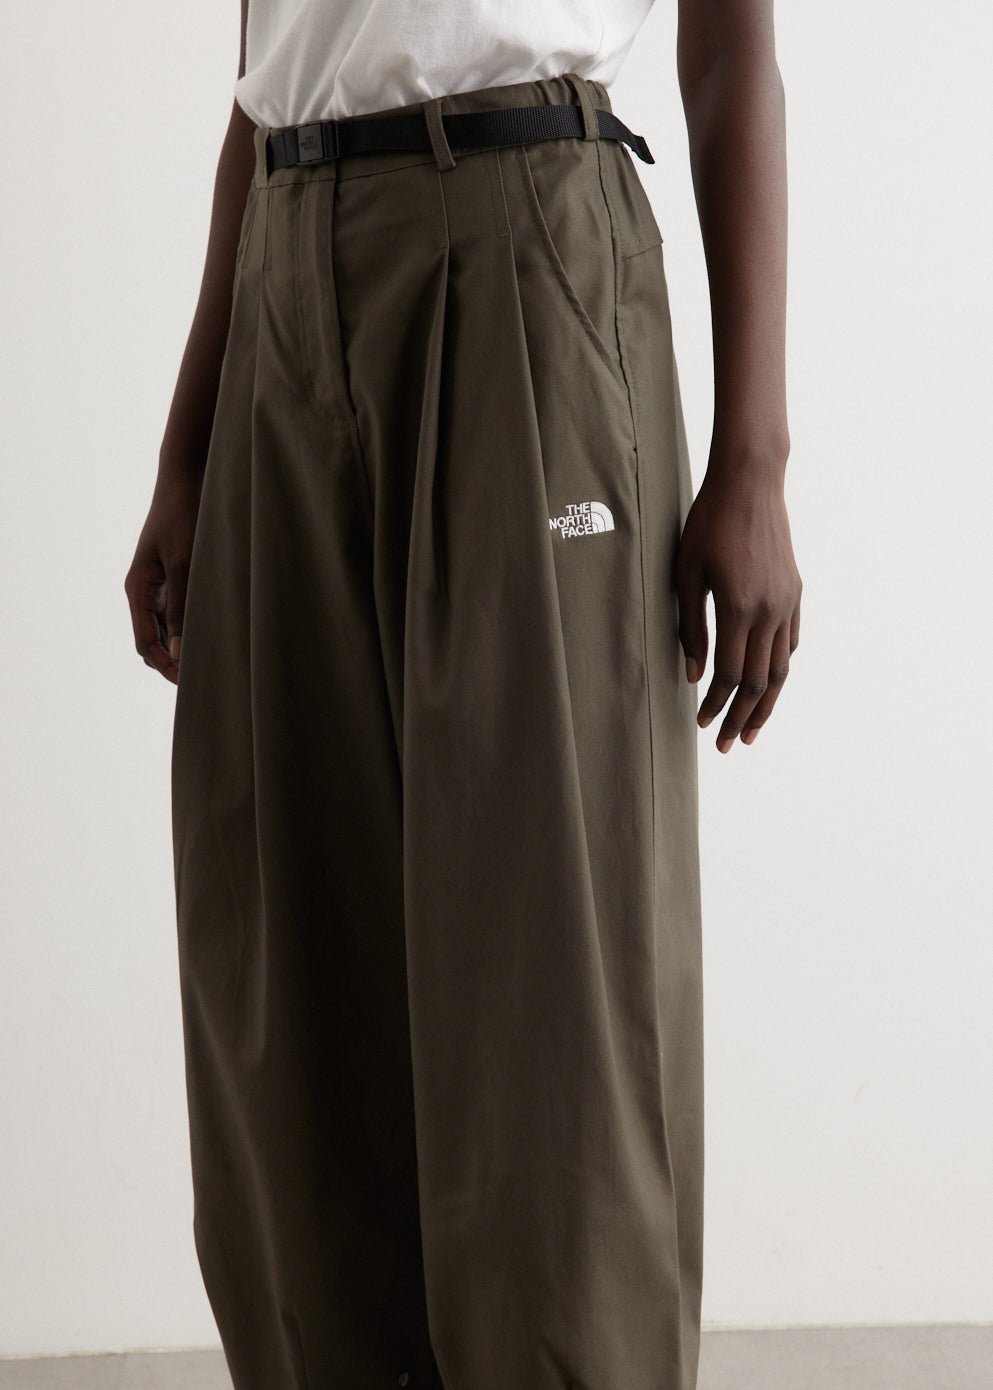 Women's Pleated Casual Pants